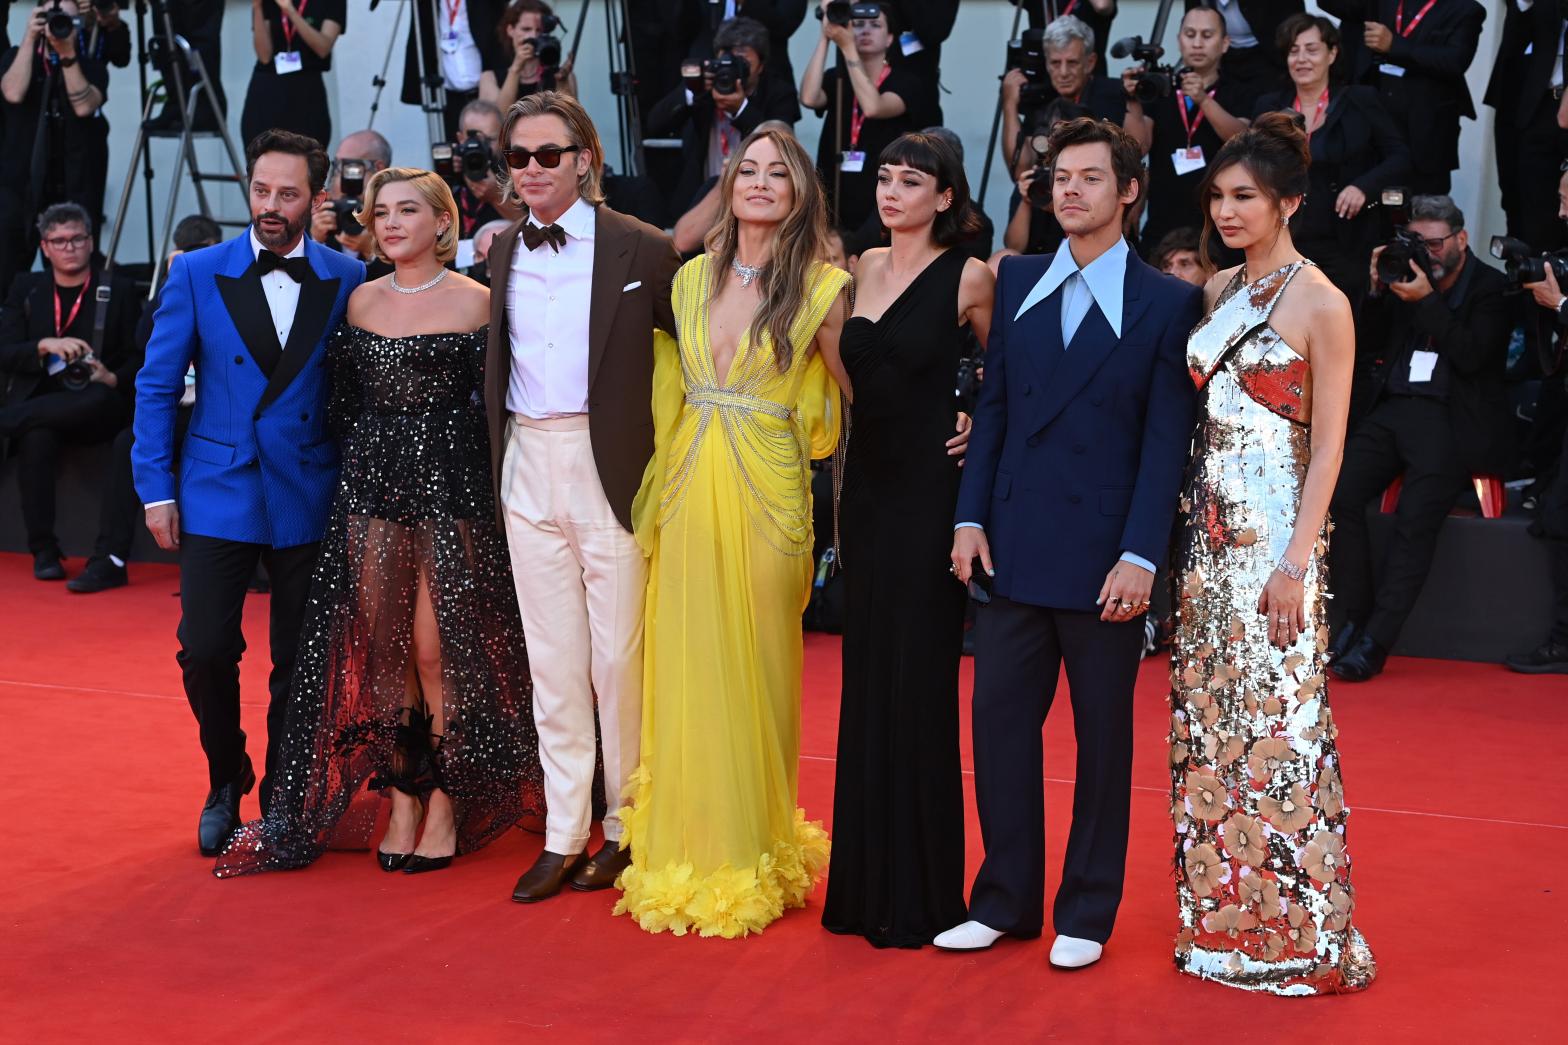 Nick Kroll, Florence Pugh, Chris Pine, Olivia Wilde, Sydney Chandler, Harry Styles and Gemma Chan star in the film, which premiered at the 79th Venice International Film Festival on September 5. (Image: Kate Green, Getty Images)